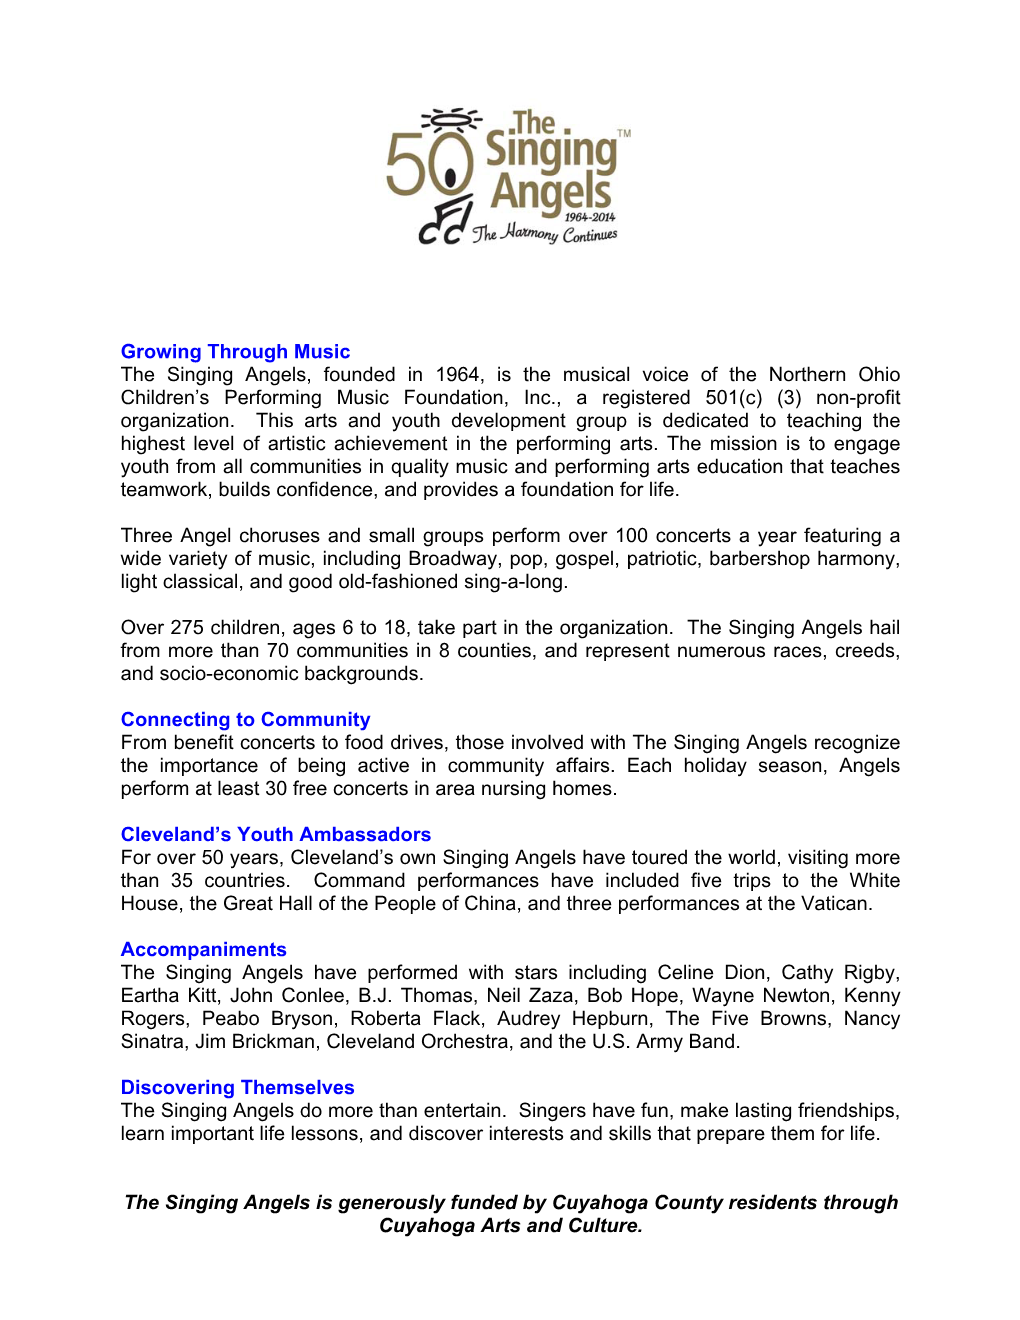 The Singing Angels Press